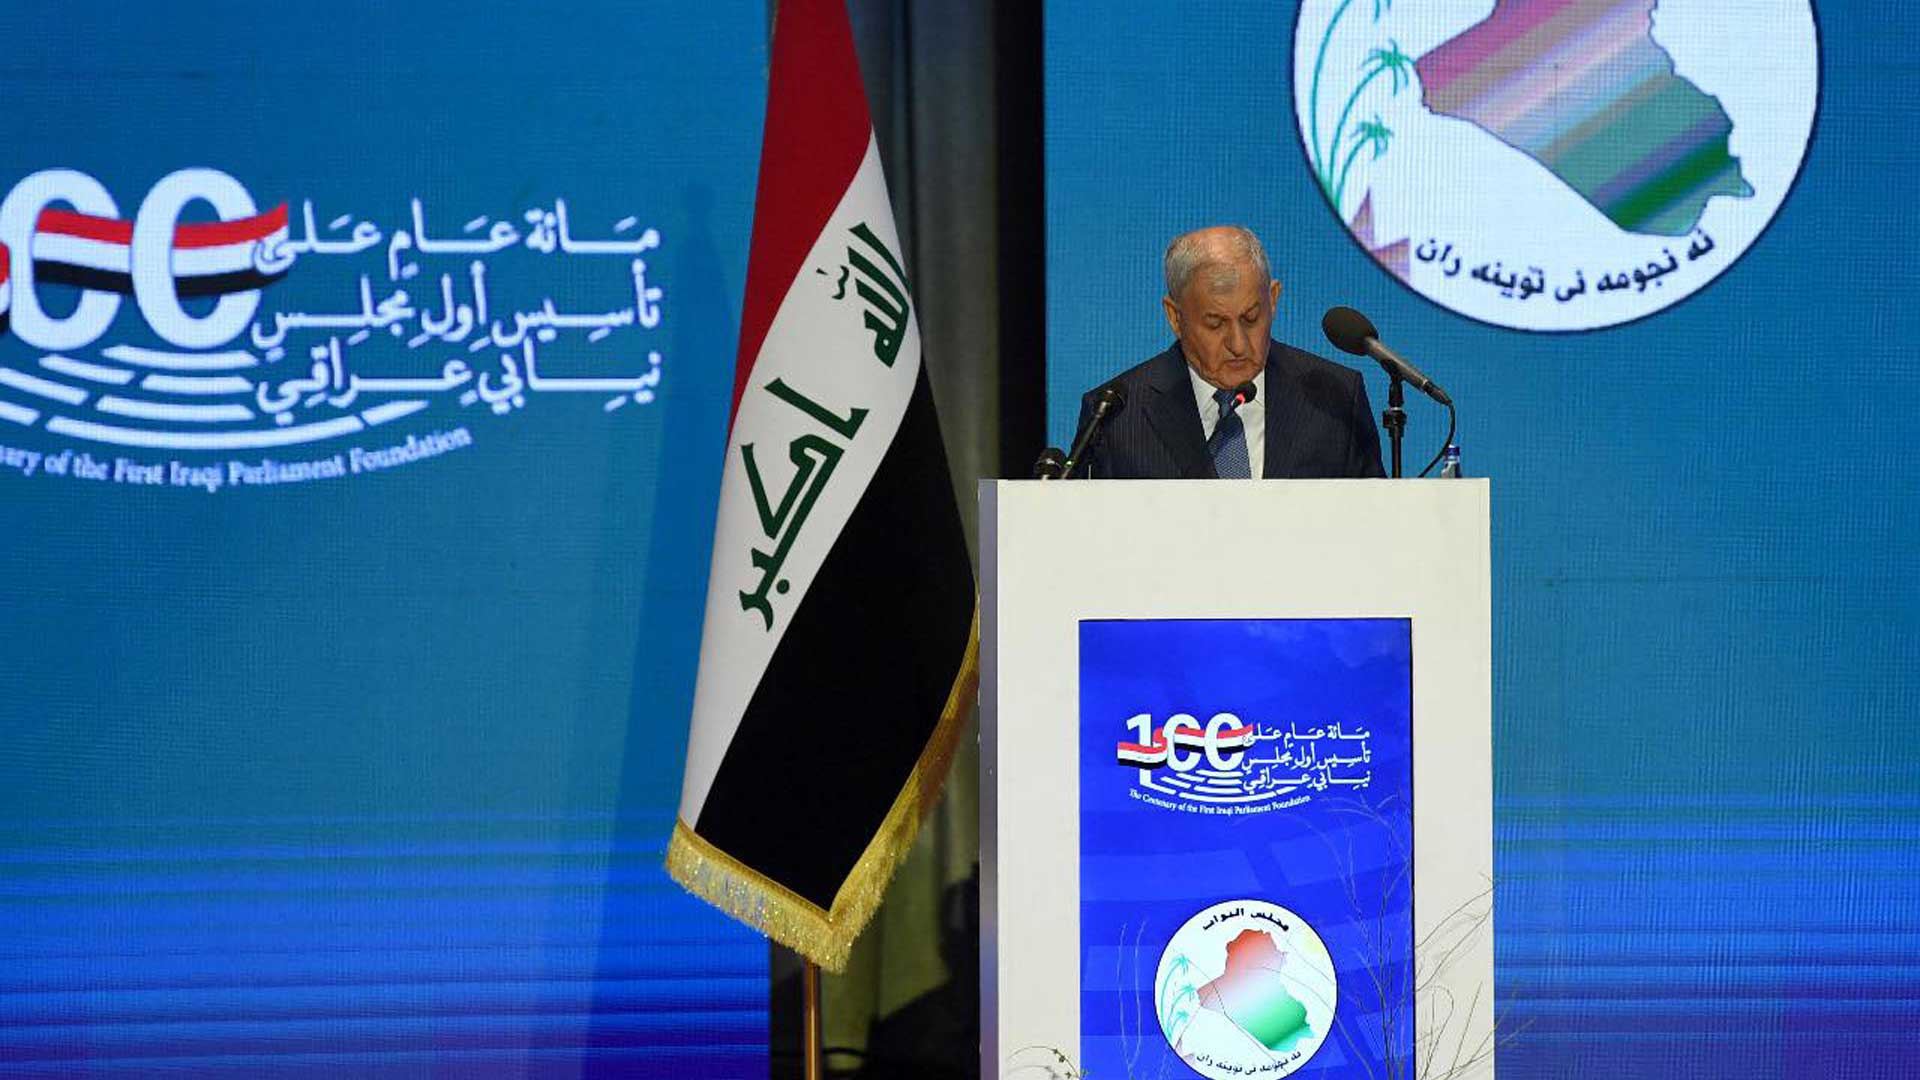  Iraqi President's delivering his speech at the Iraqi Parliament's centenary.